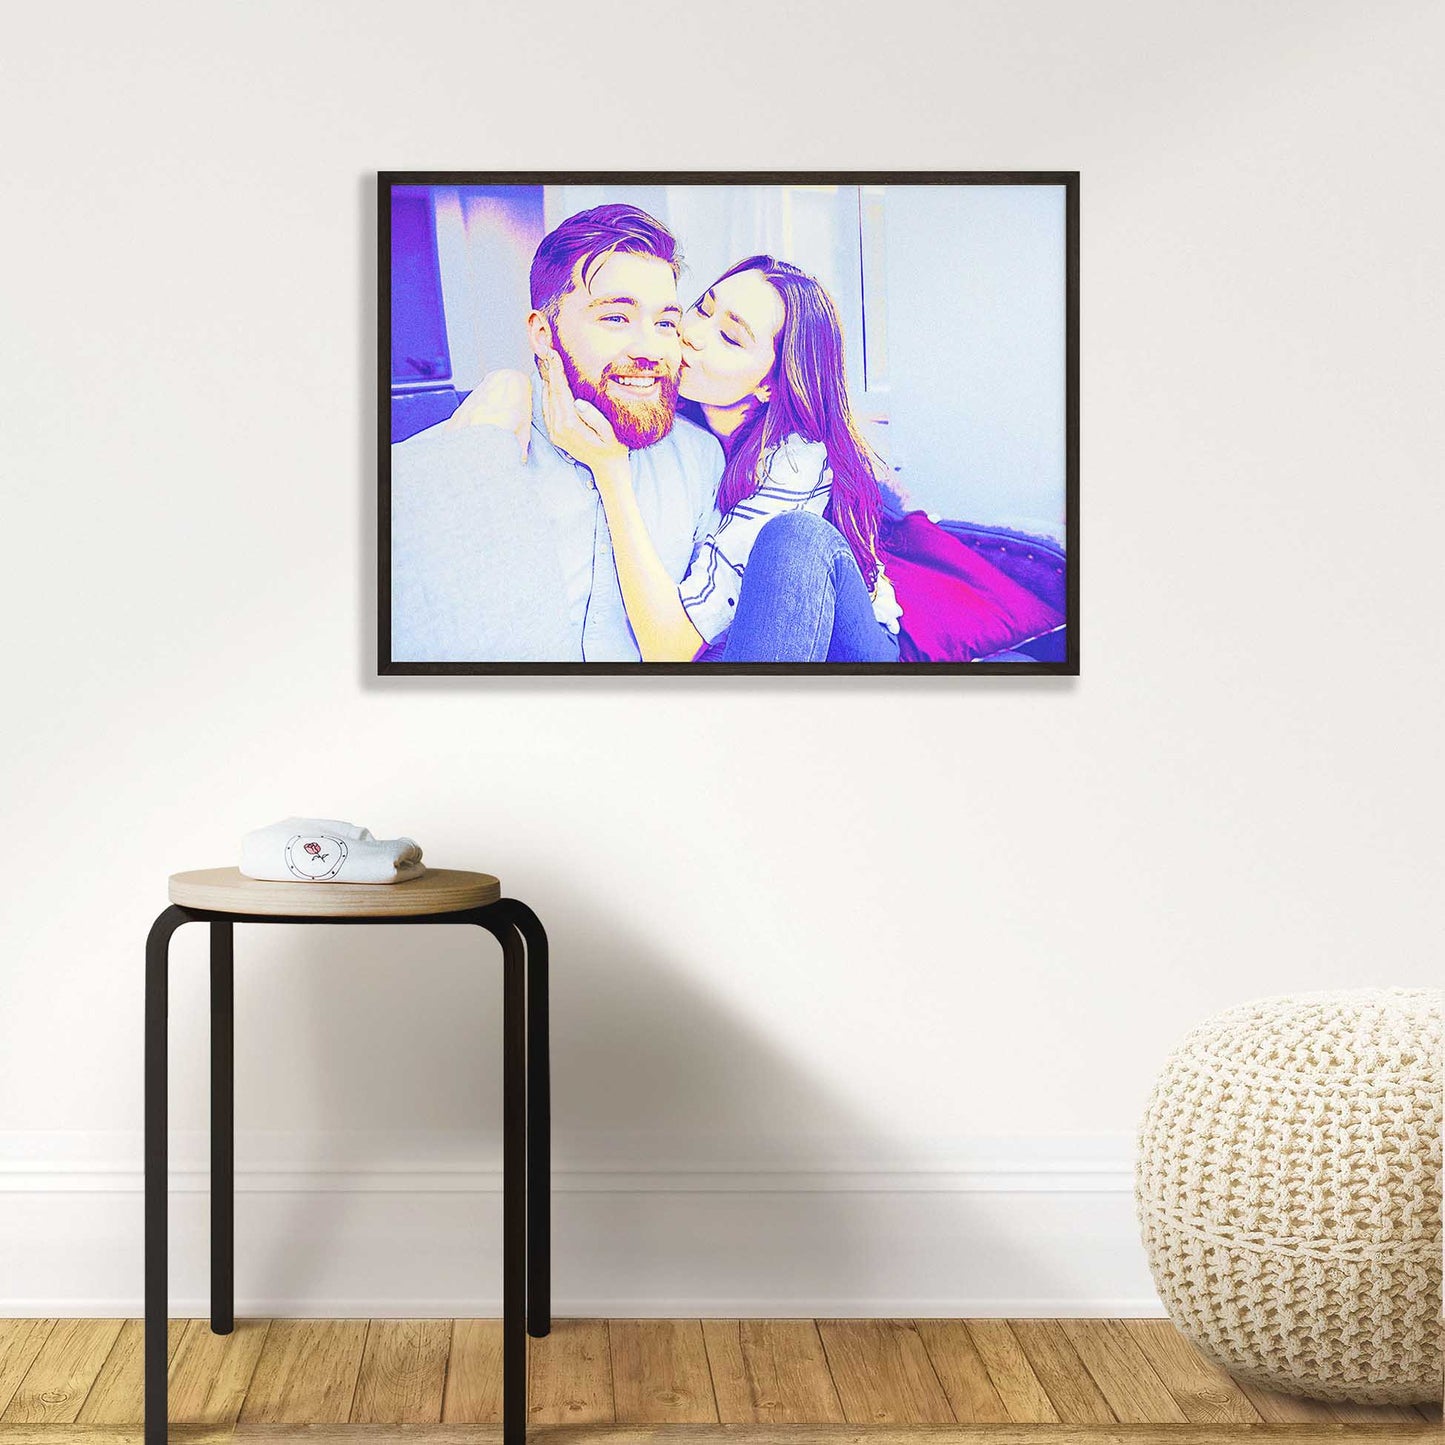 Add a burst of bold colors and imaginative flair to your home decor with the Personalised Blue & Purple Framed Print. Its fun and vibrant vibes, printed from your photo, create a cool and unique interior